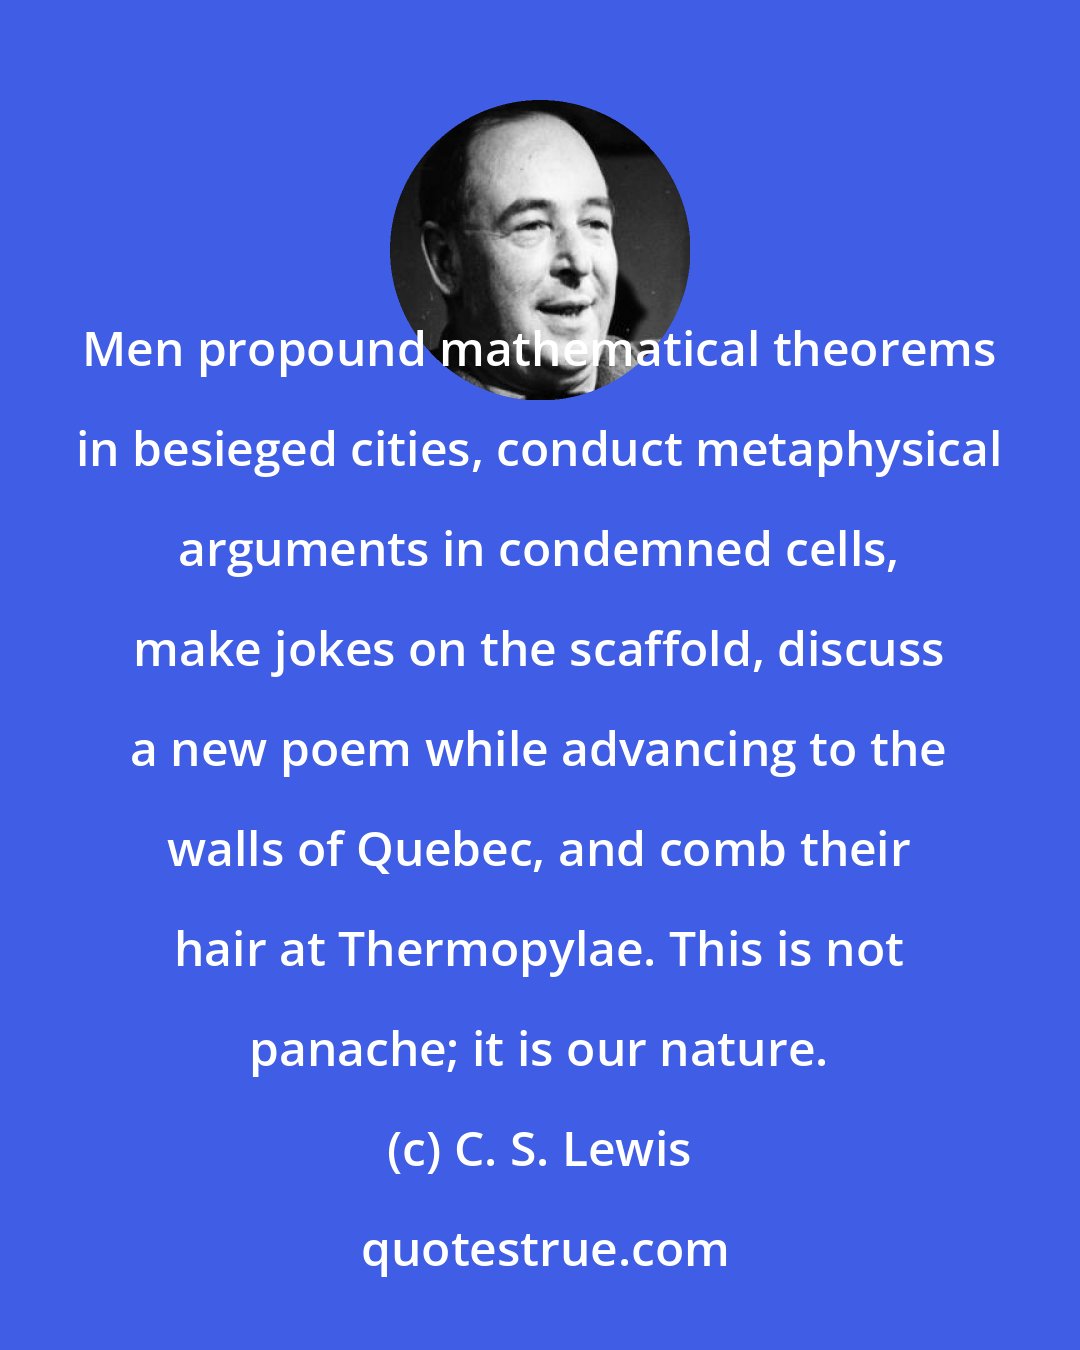 C. S. Lewis: Men propound mathematical theorems in besieged cities, conduct metaphysical arguments in condemned cells, make jokes on the scaffold, discuss a new poem while advancing to the walls of Quebec, and comb their hair at Thermopylae. This is not panache; it is our nature.